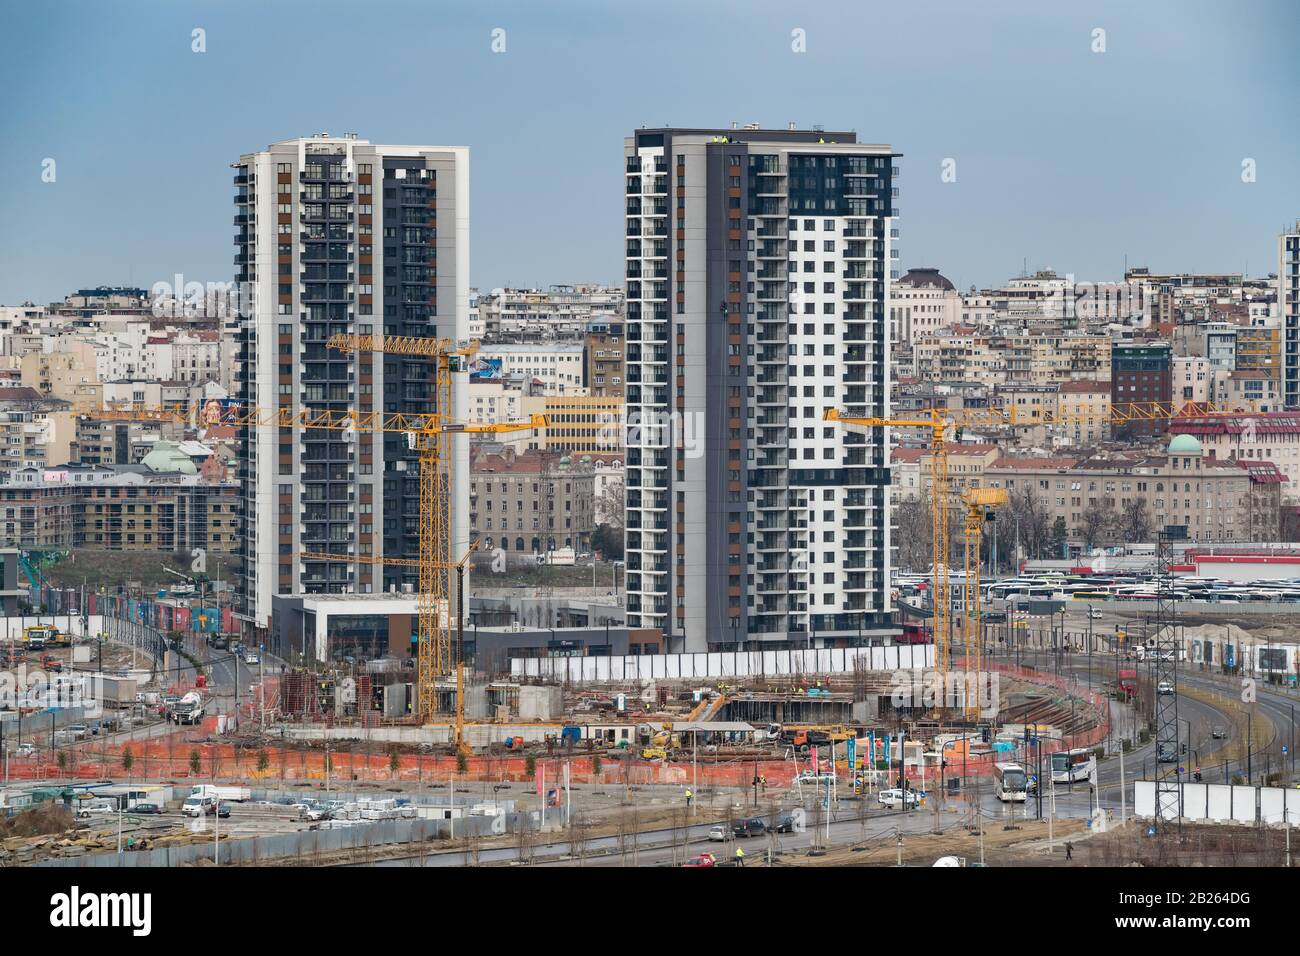 Construction of buildings on bank of the Sava river in the city center, near the gazelle (gazela) bridge. Confluence of the Sava river into the Danube Stock Photo